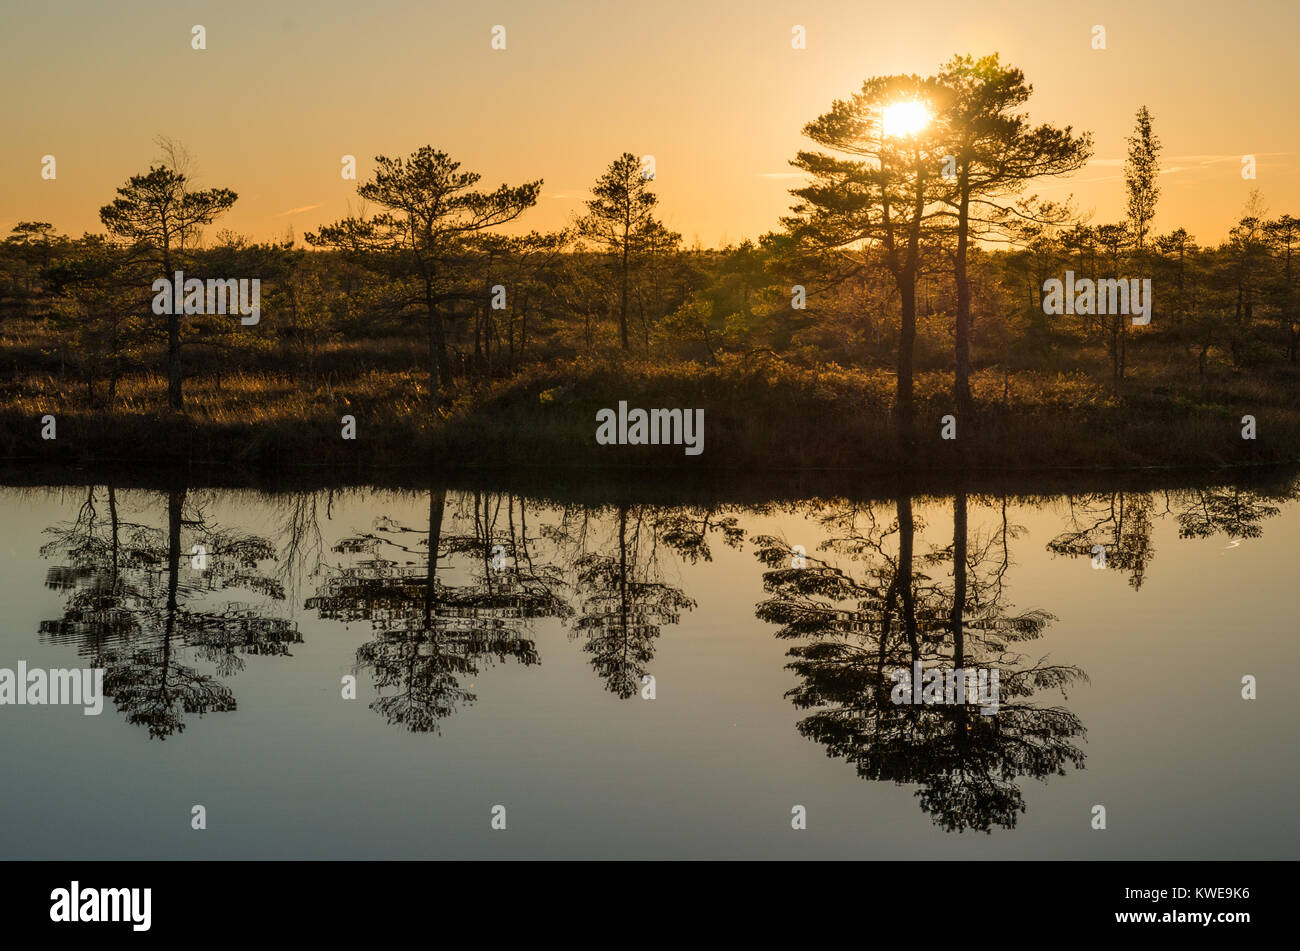 A scene on a swamp during sunset with orange light,  tree silhouettes and reflections in the pond. Stock Photo